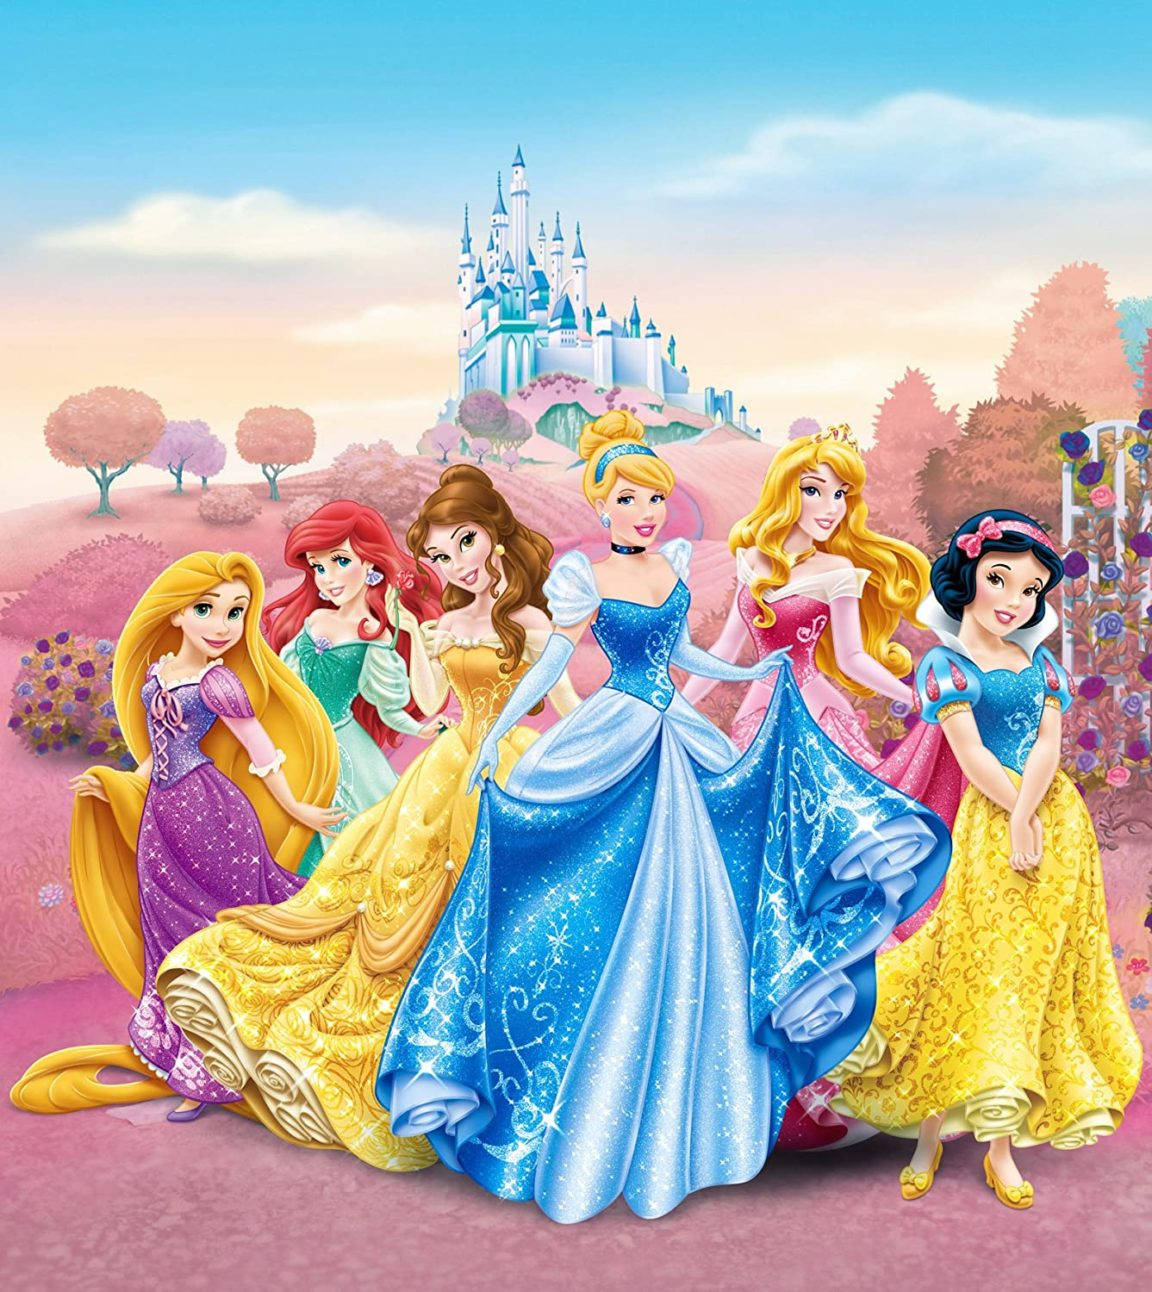 Feel the Magic of Being a Princess Wallpaper